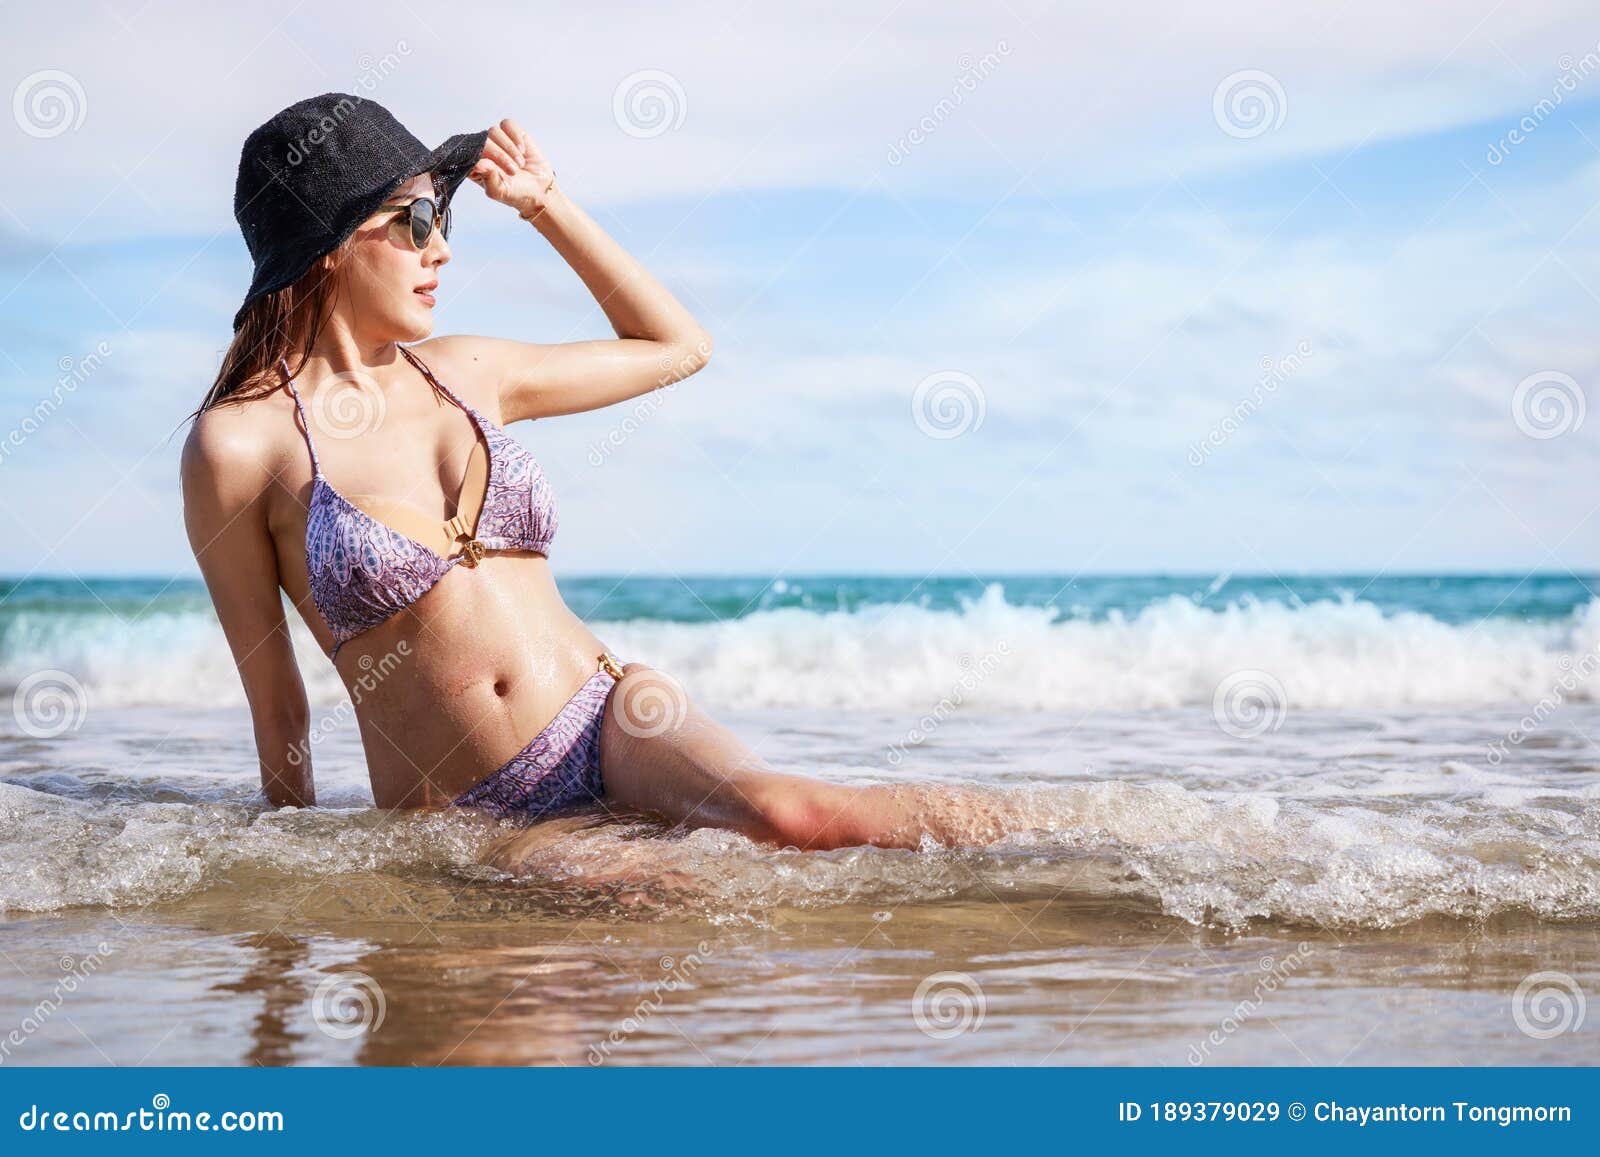 5 703 Girl Sexy Teenage Photos Free Royalty Free Stock Photos From Dreamstime